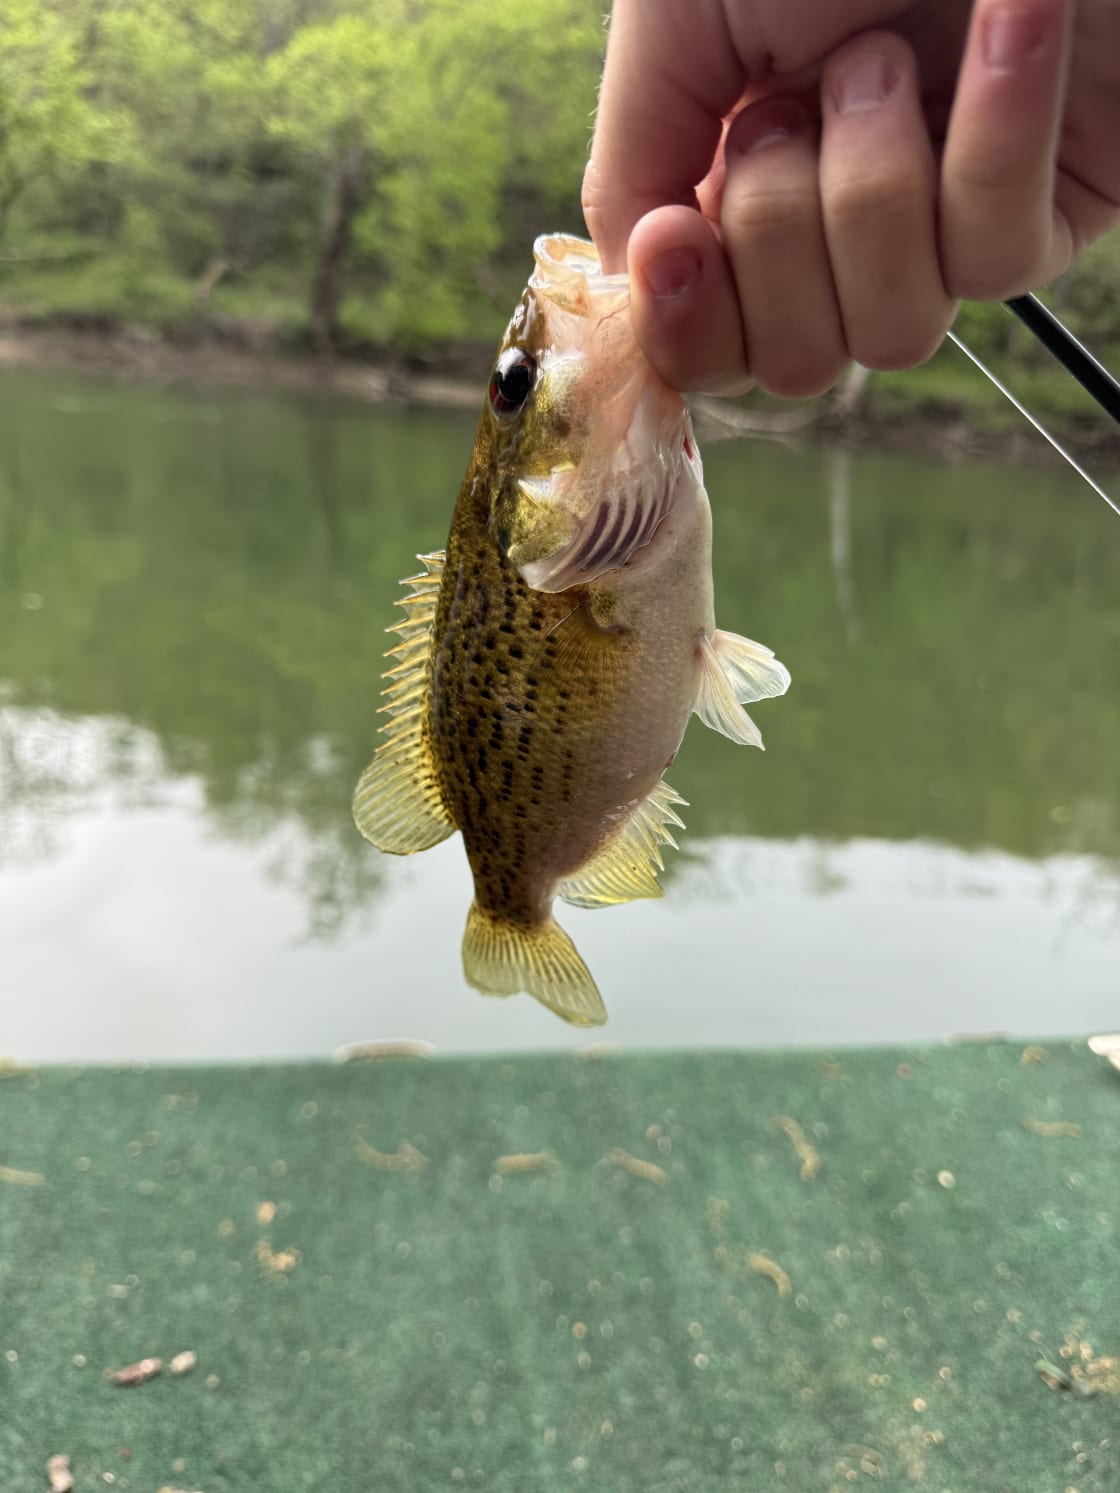 A crappie I caught. (cast underneath the trees)